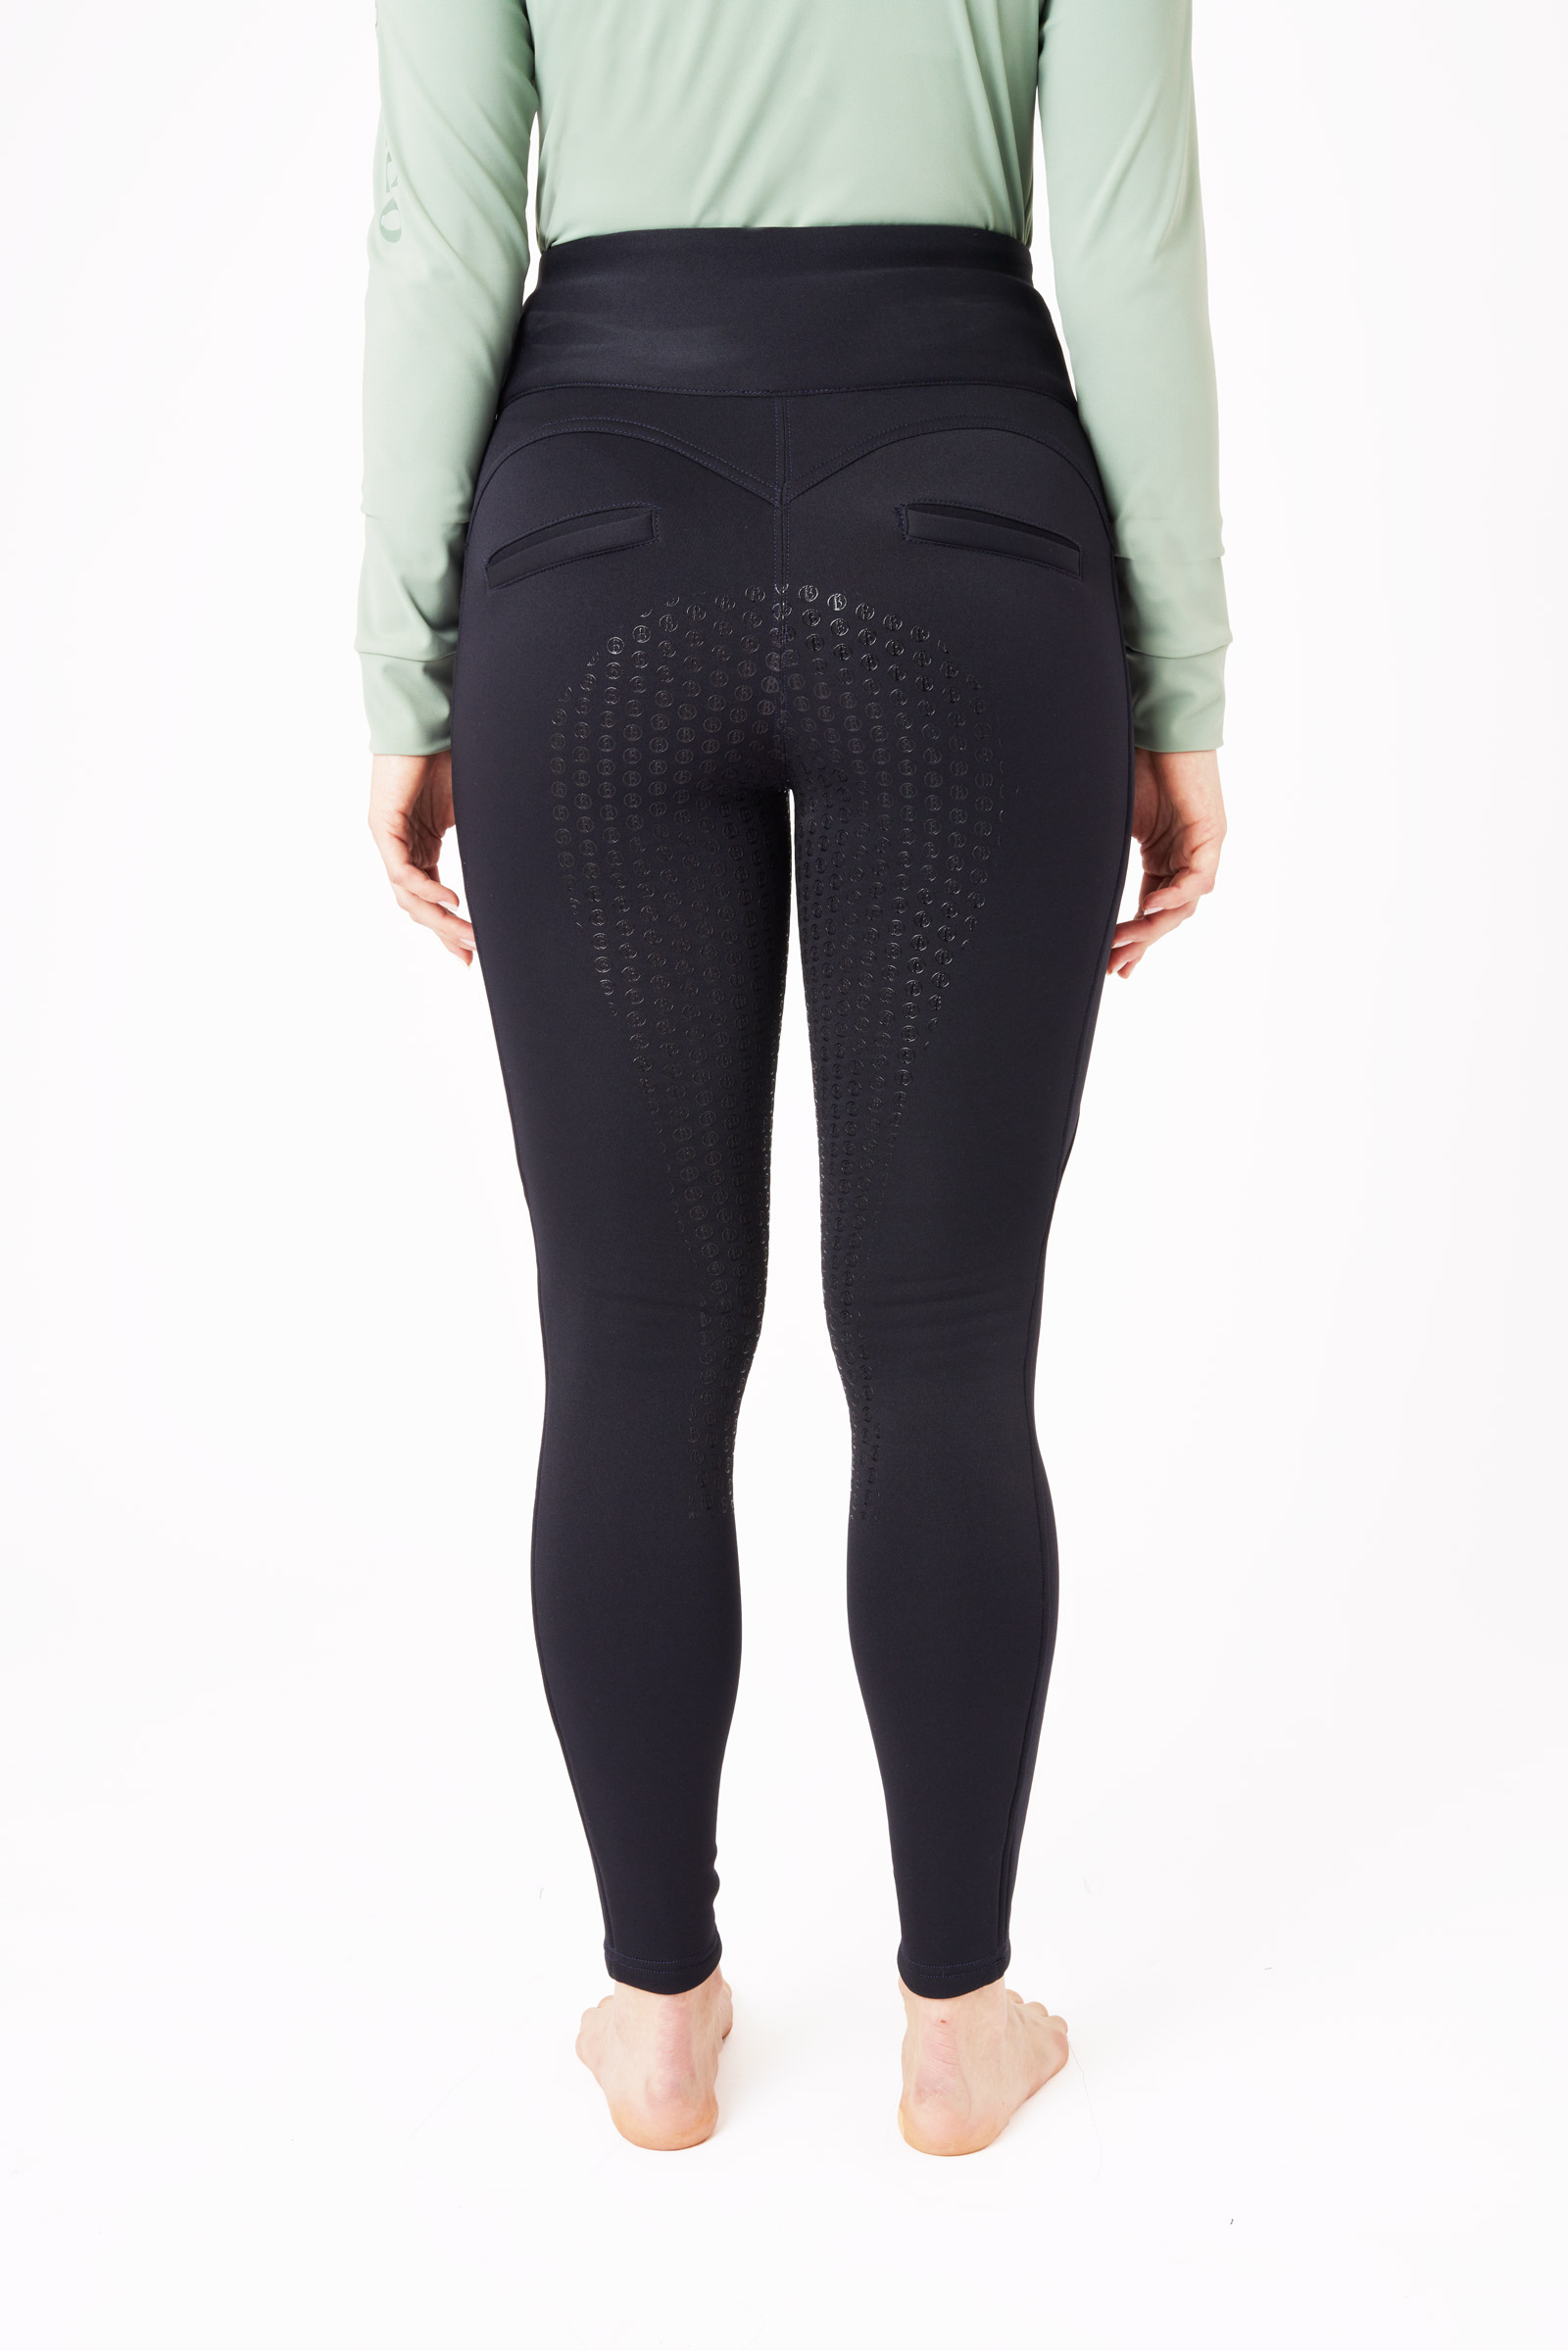 Thermal Contrast Riding Tights - excelequine